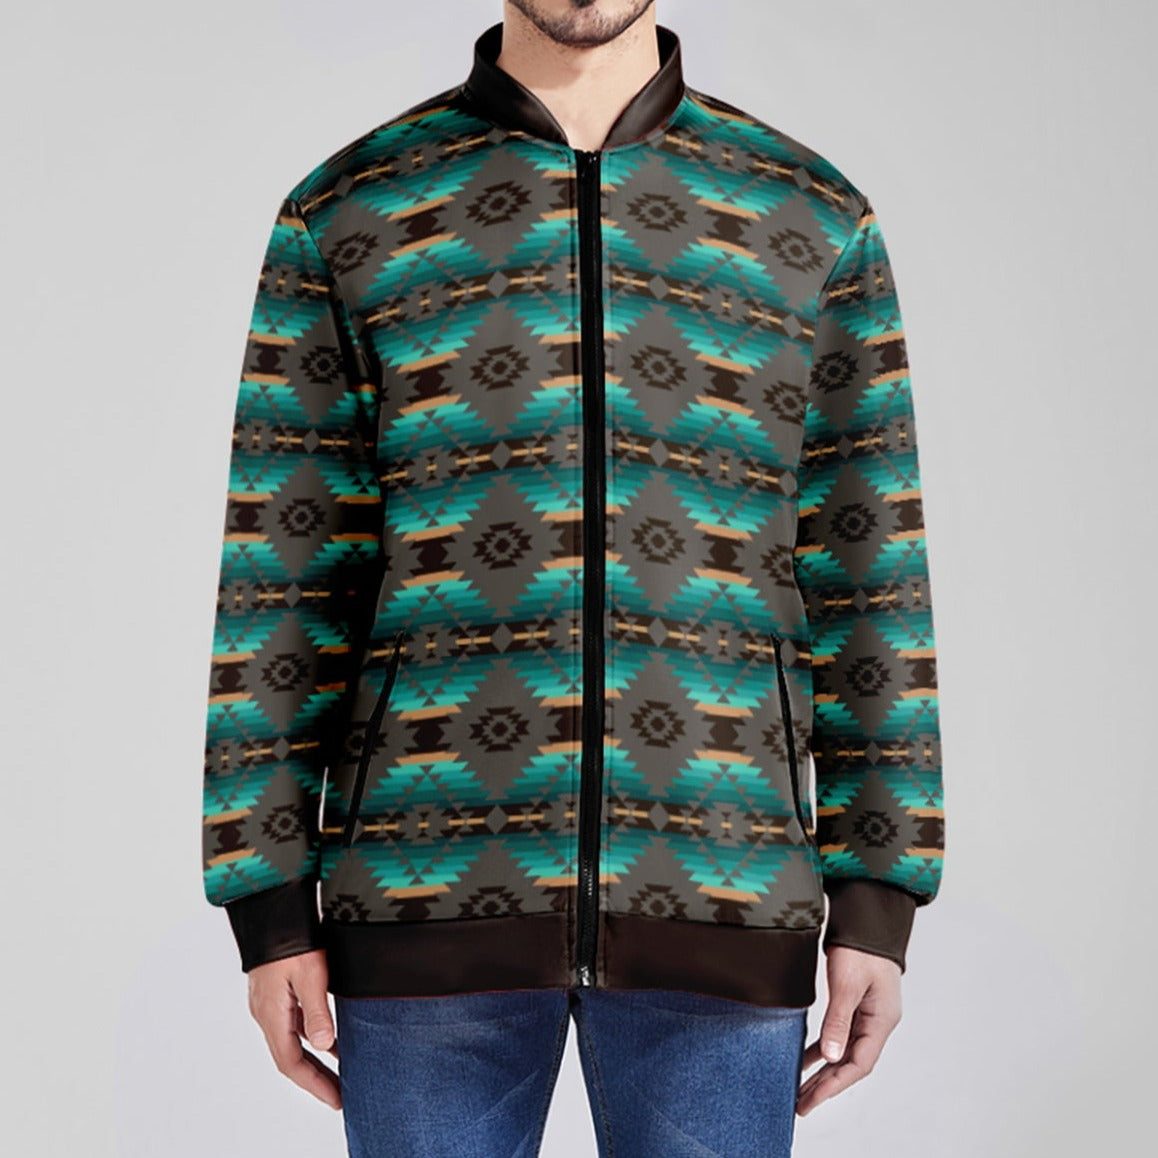 Cree Confederacy Zippered Collared Lightweight Jacket